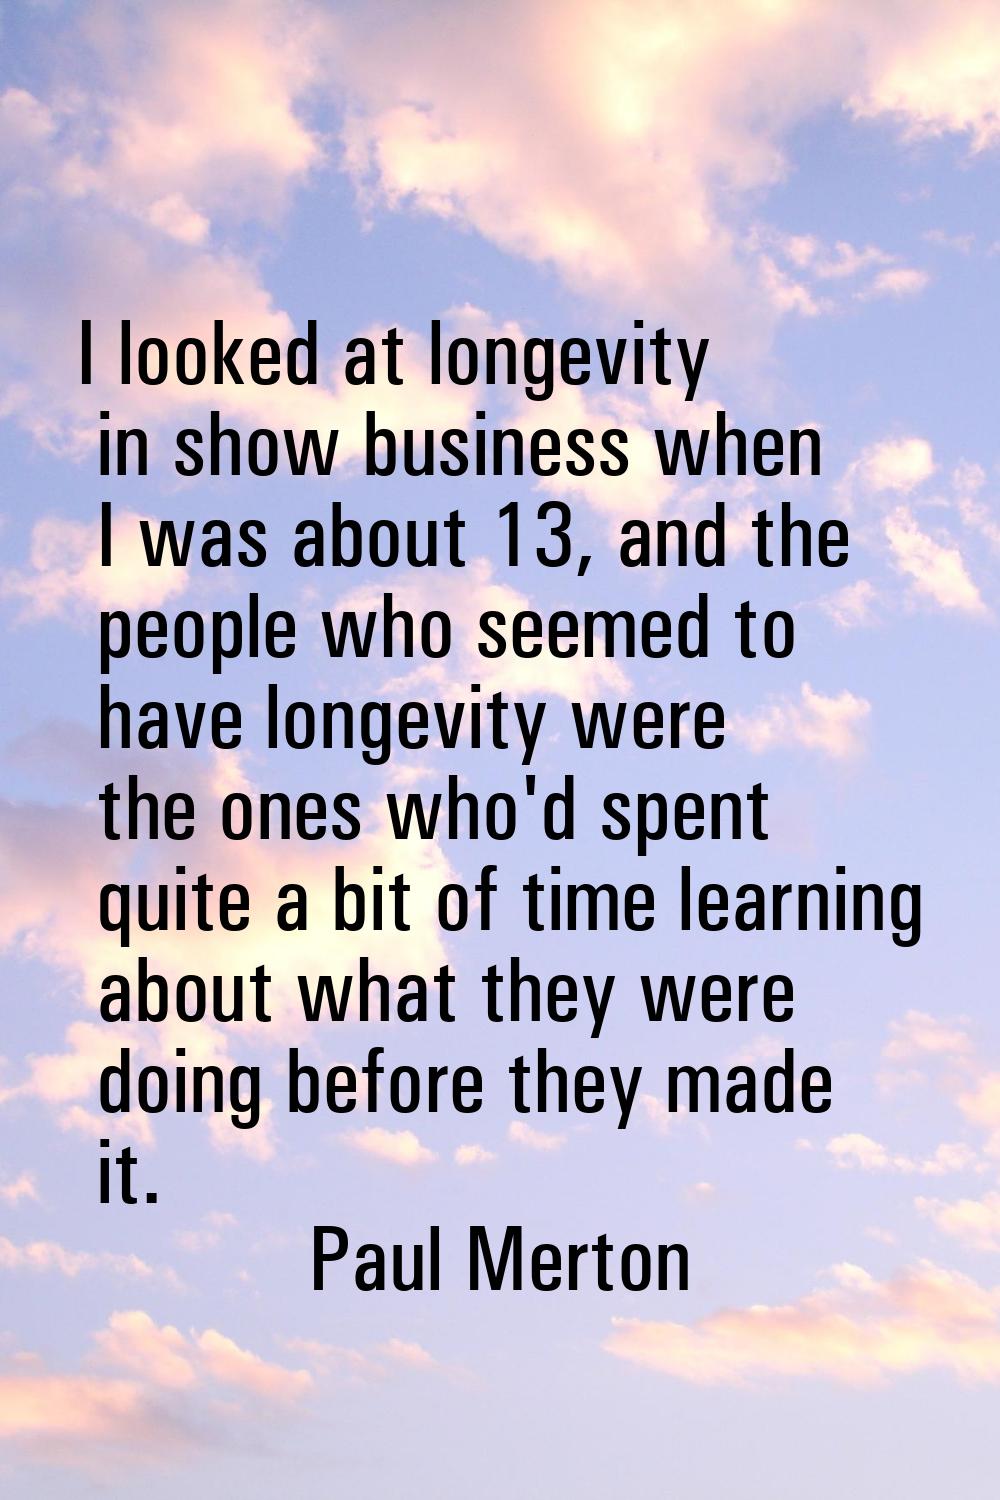 I looked at longevity in show business when I was about 13, and the people who seemed to have longe